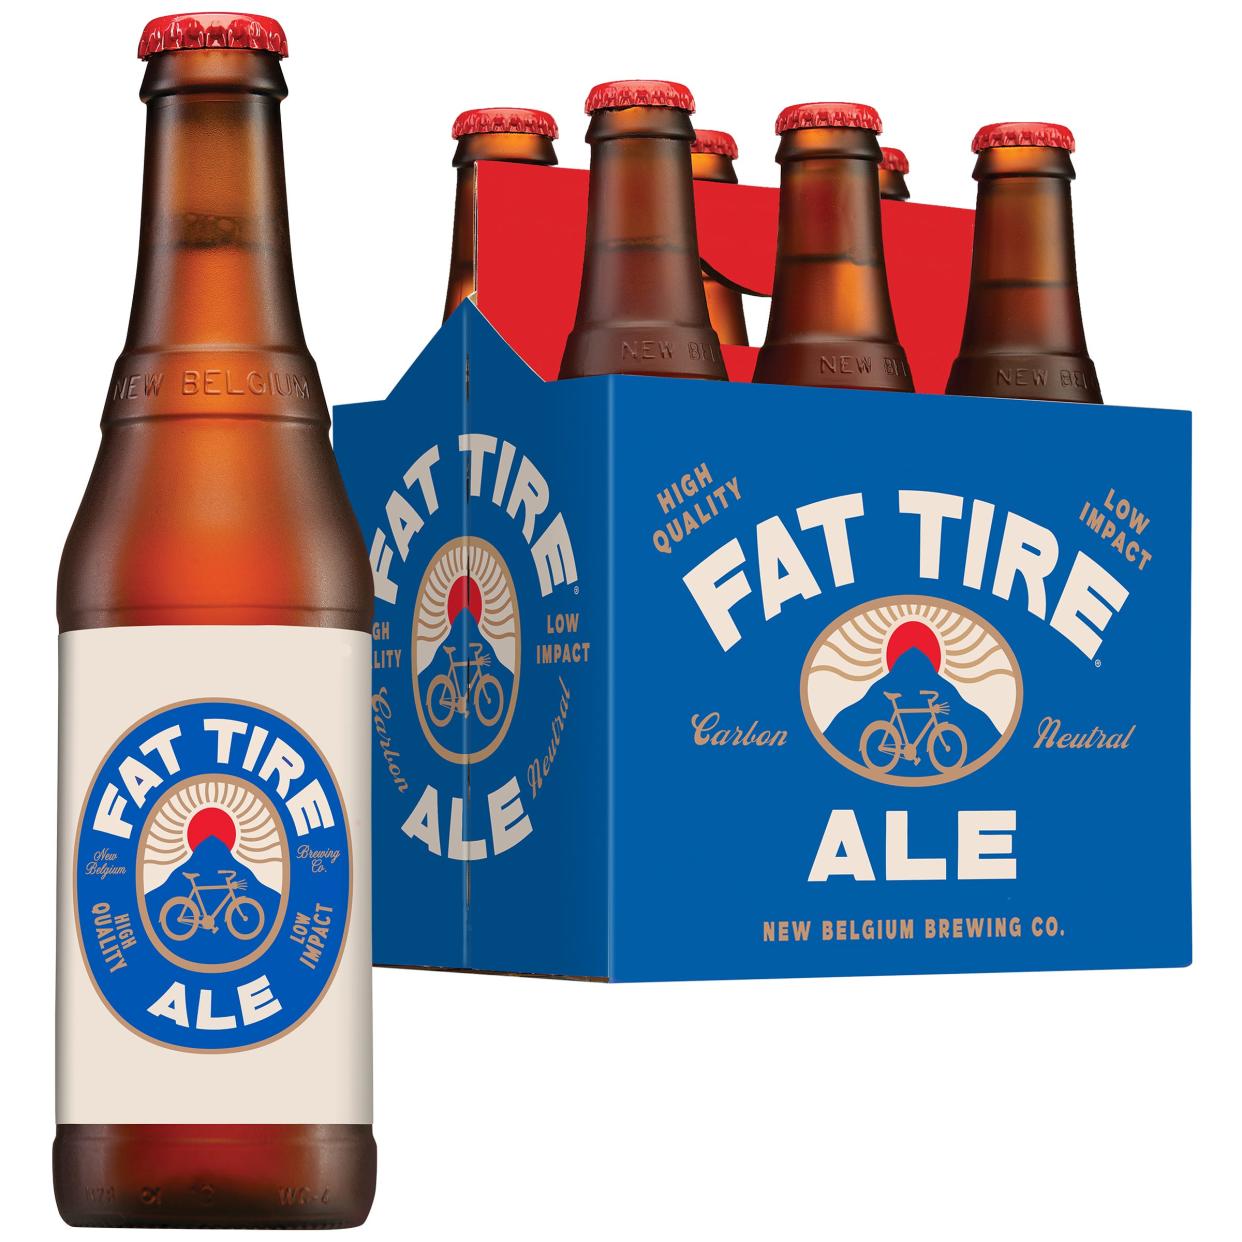 New Belgium Brewing's Fat Tire has been rebranded to reflect the company's environmental sustainability initiative.